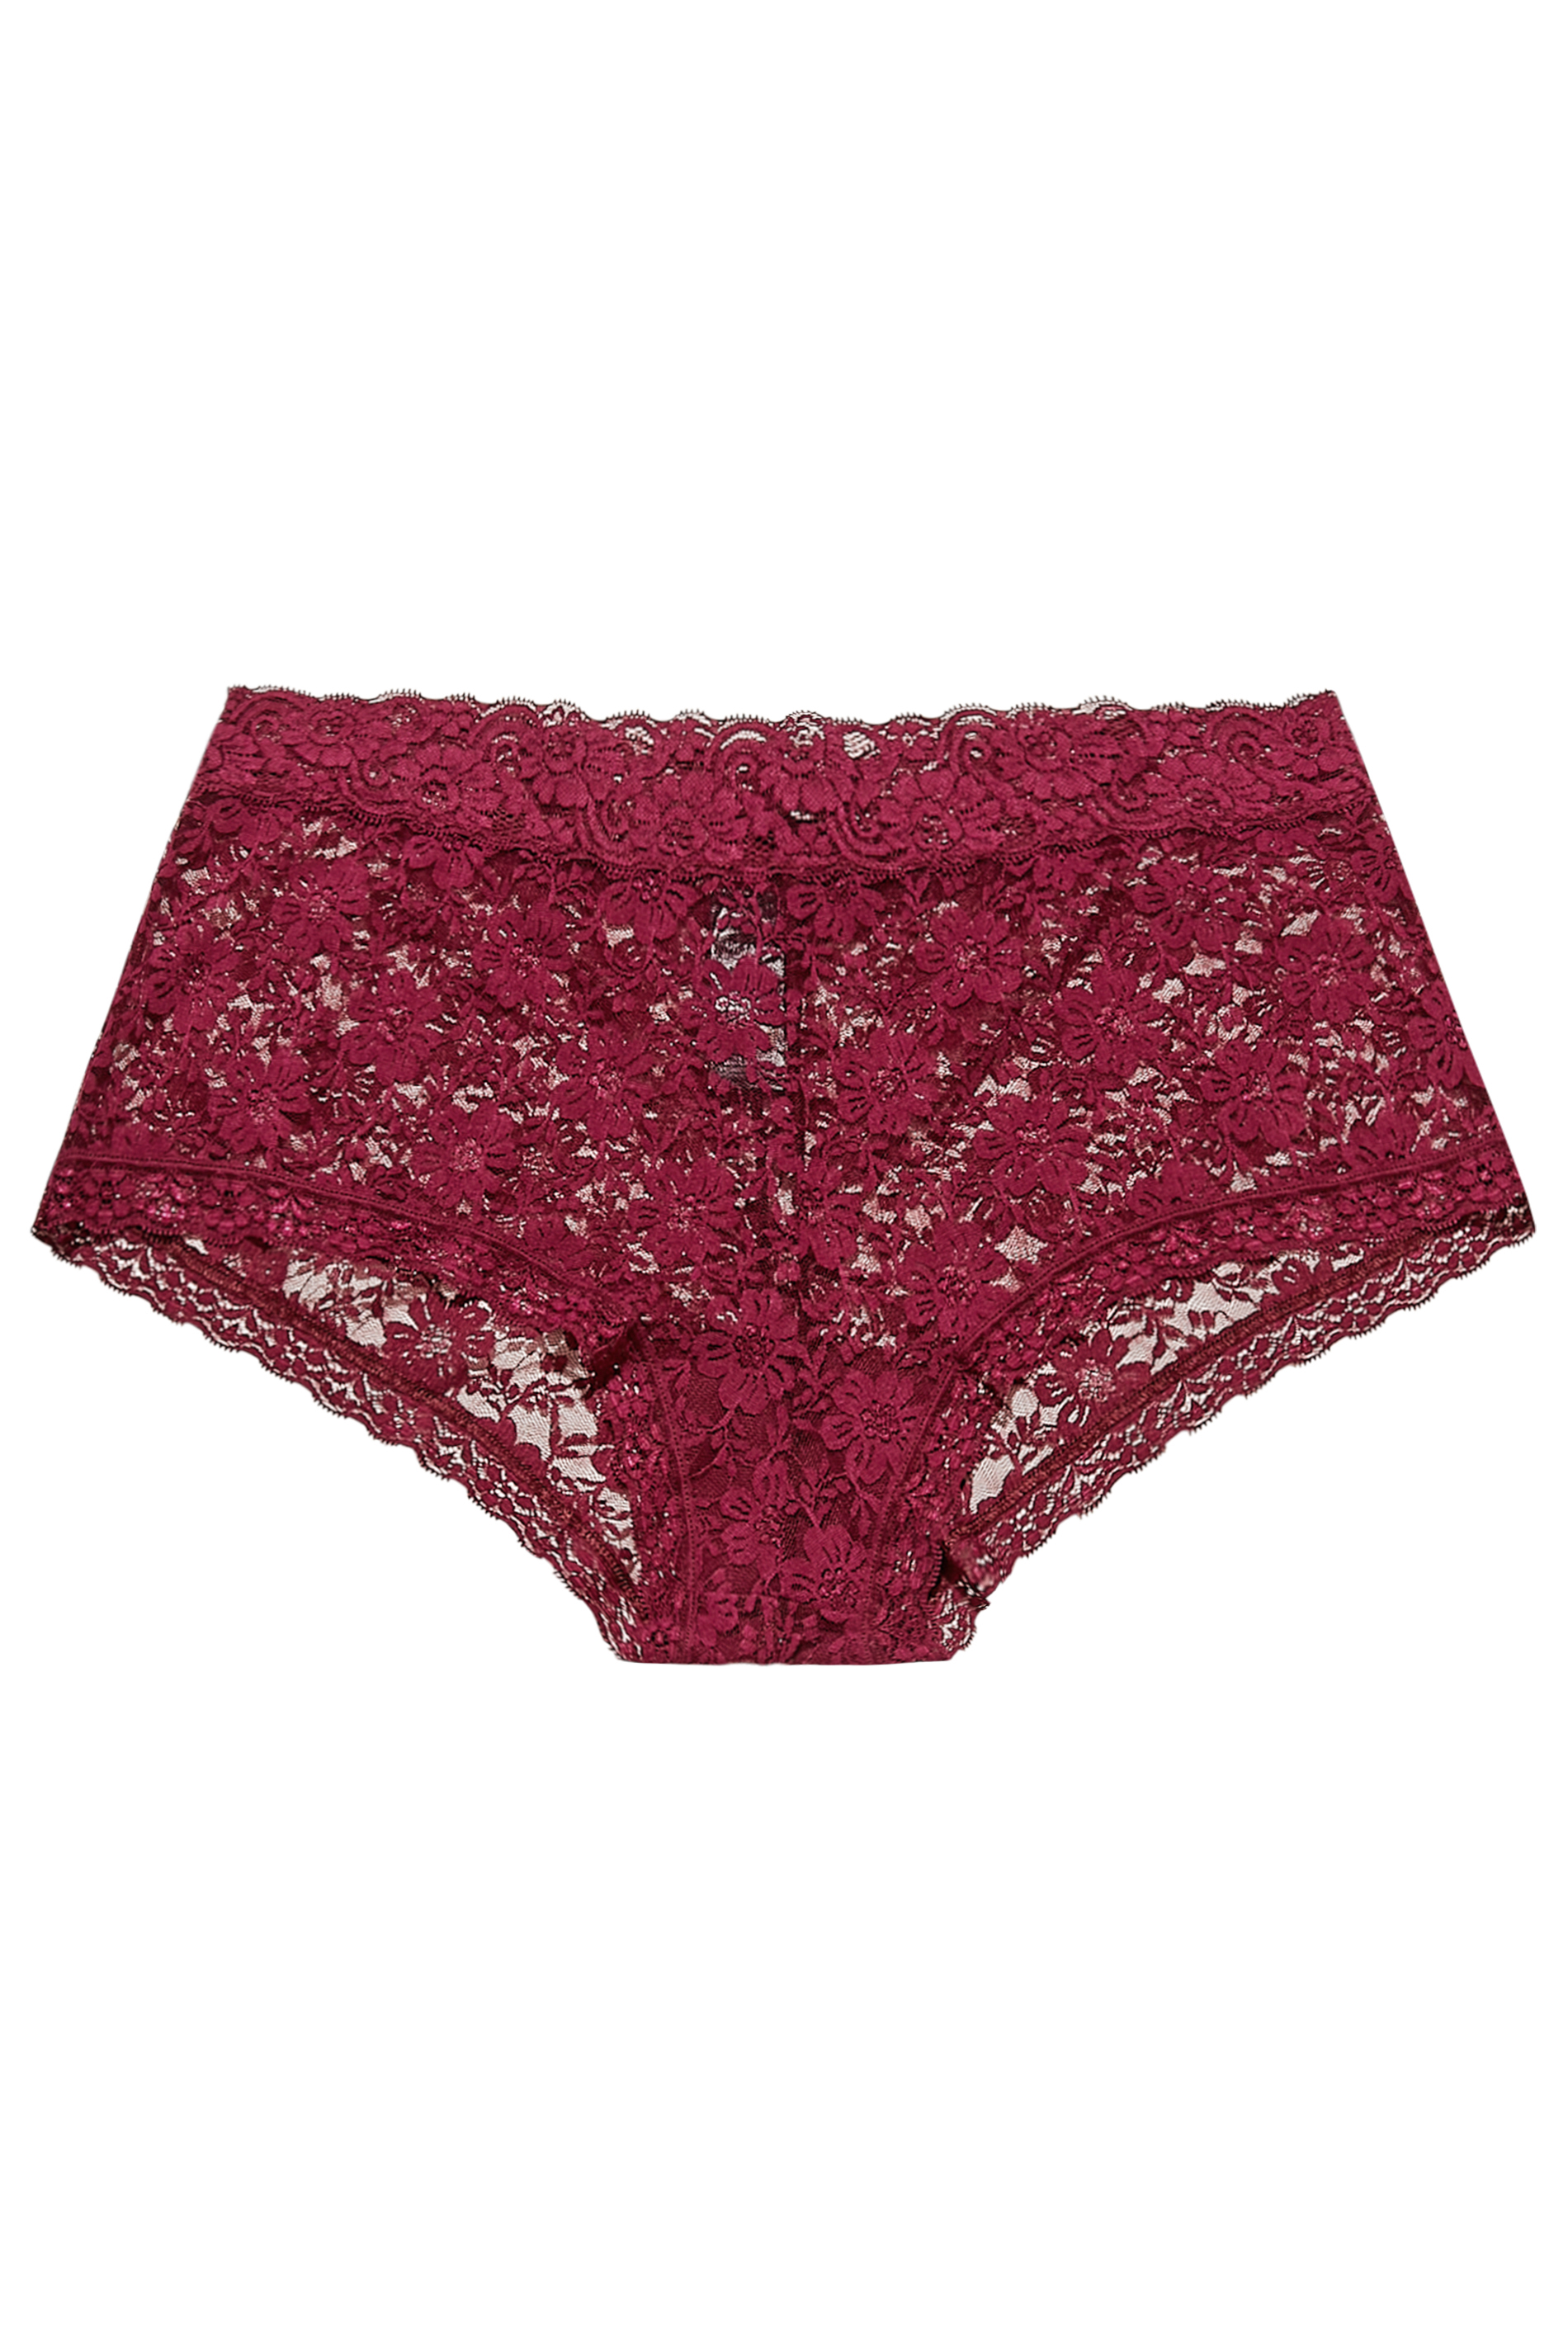 Plus Size Burgundy Red Floral Lace Mid Rise Shorts | Yours Clothing 3